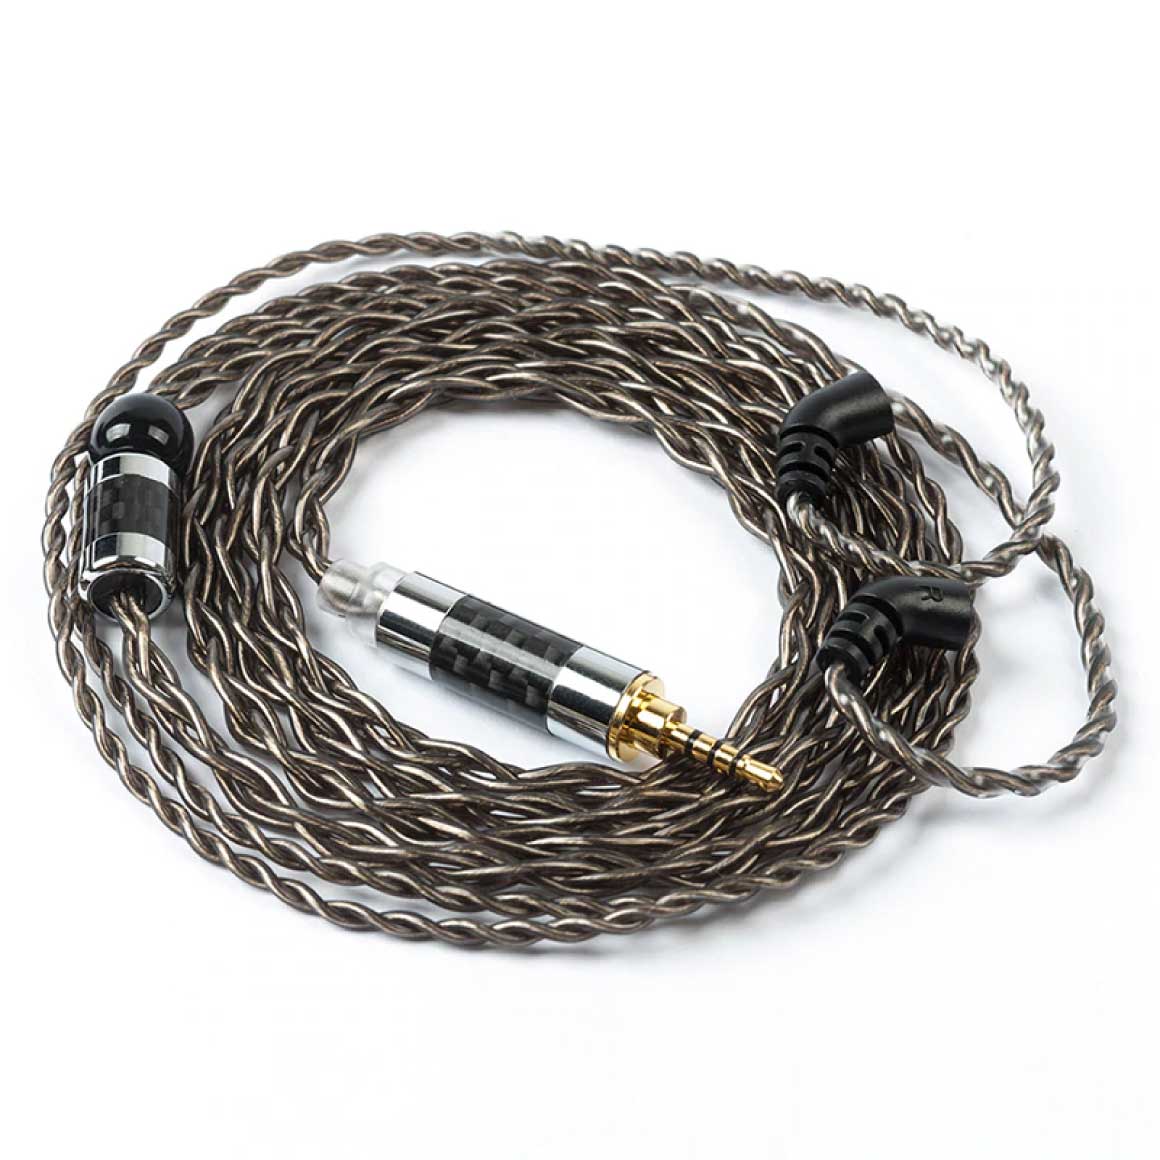 Headphone Zone-BLON 4 Core Silver Plated Cable-2.5mm